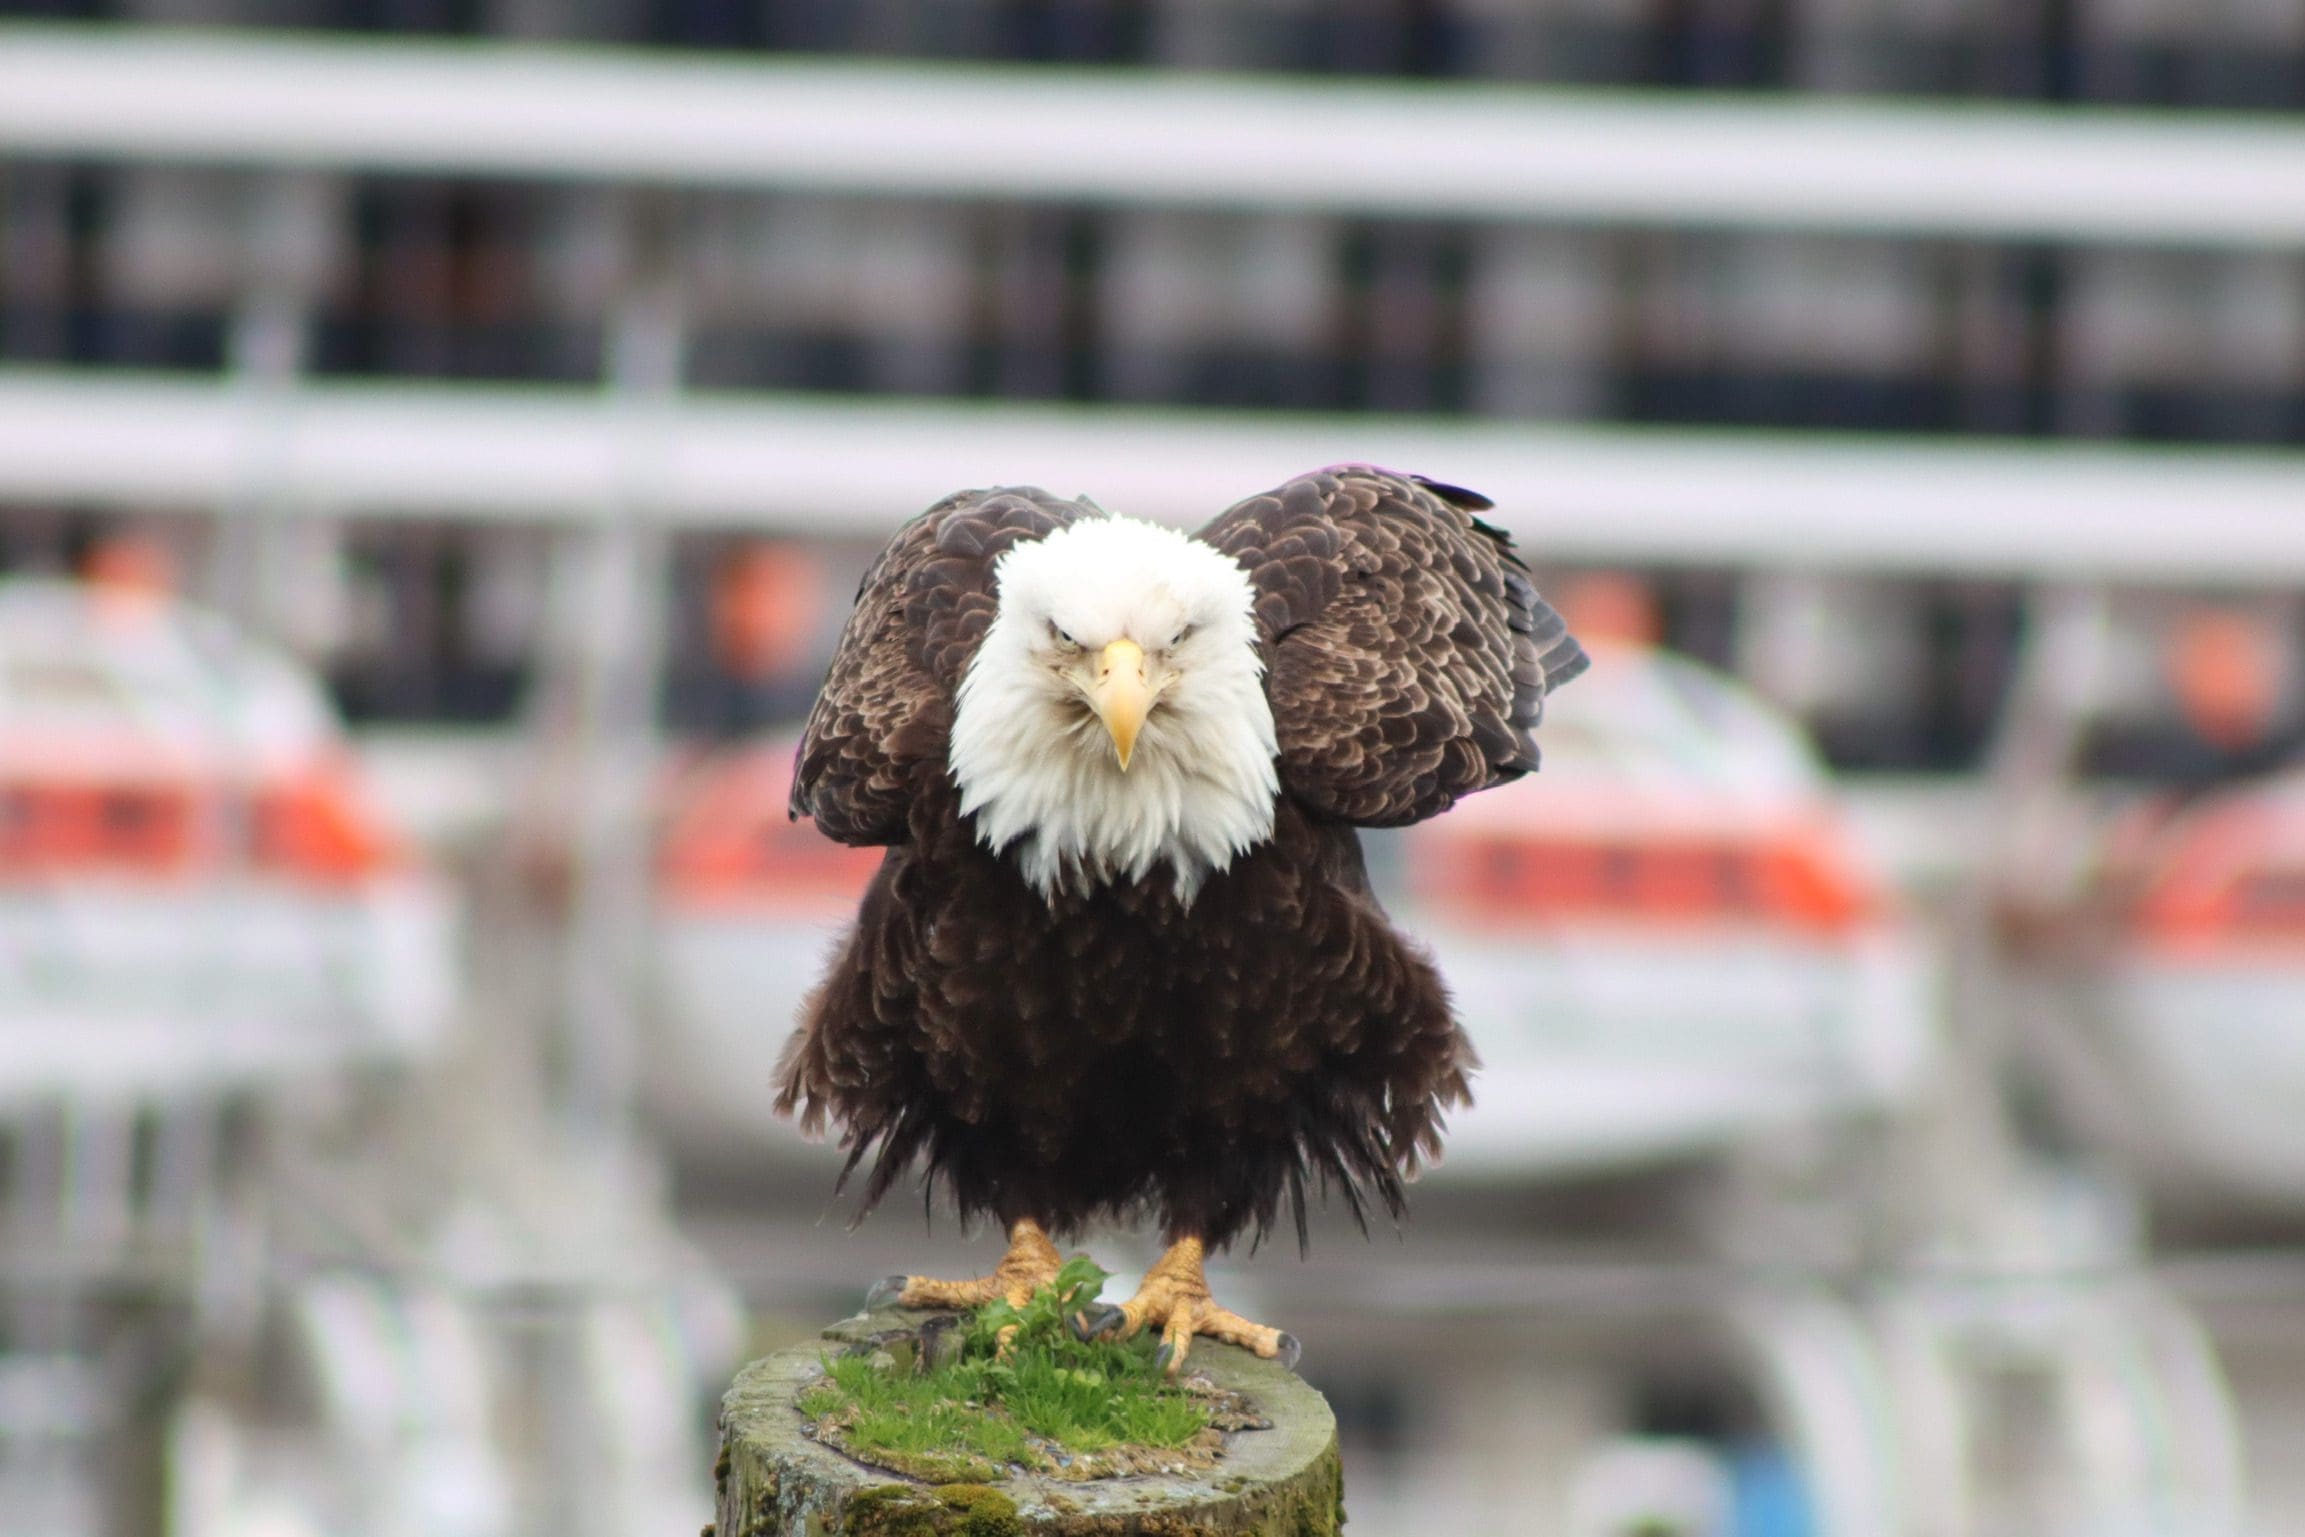 Bald Eagle poses in front of cruise ship while sitting on a piling in Thomas Basin Boat Harbor